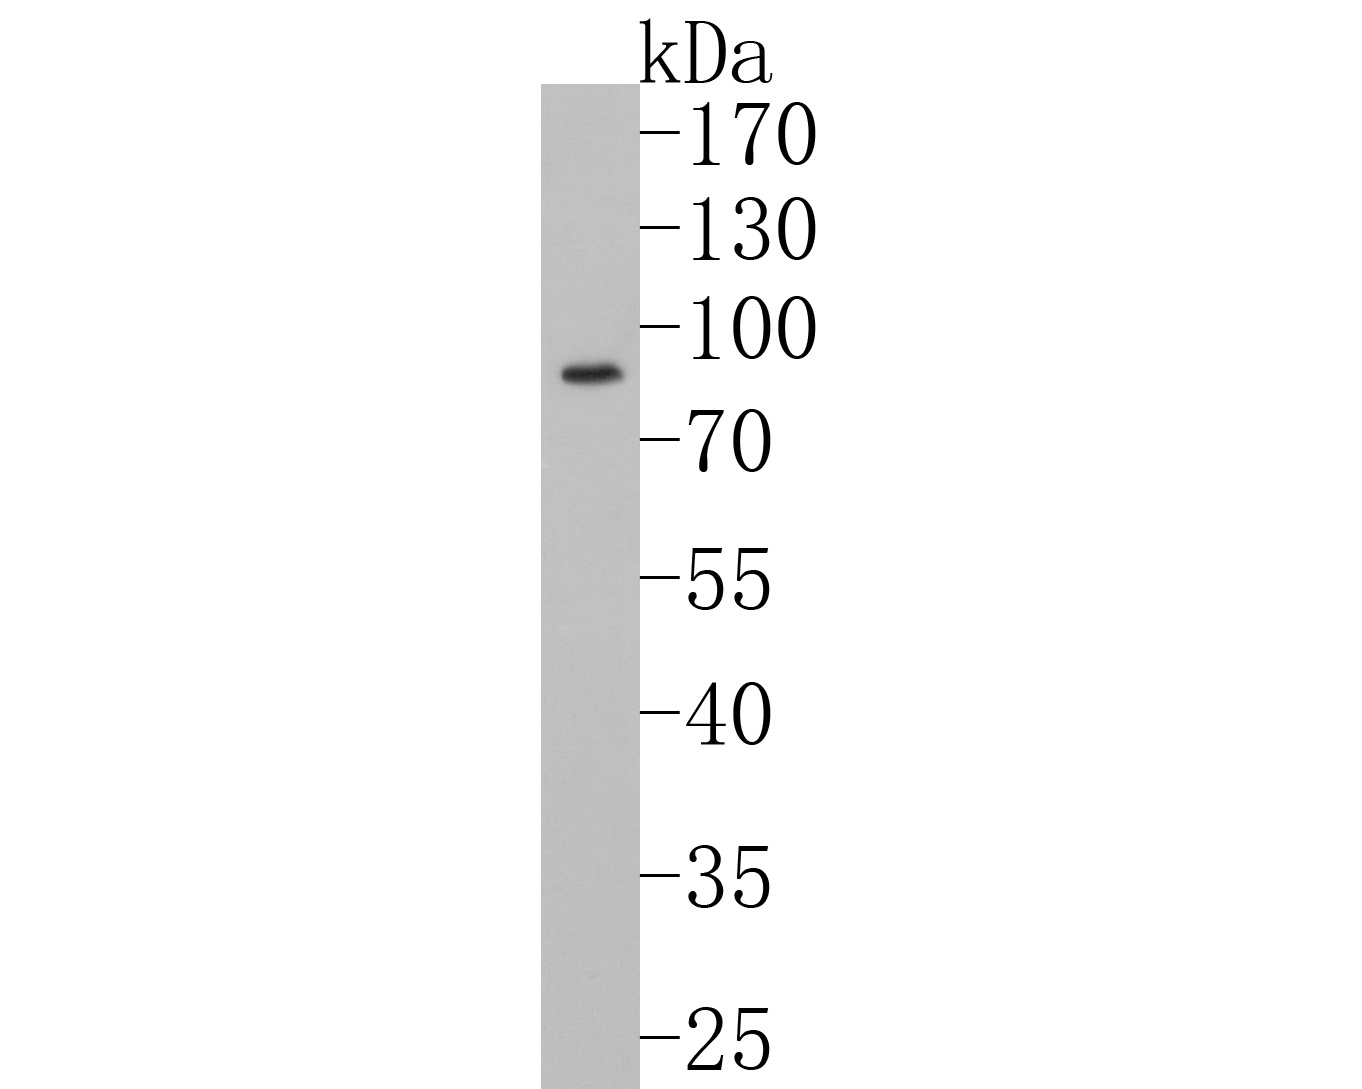 Western blot analysis of GARS on Raji cell lysates. Proteins were transferred to a PVDF membrane and blocked with 5% BSA in PBS for 1 hour at room temperature. The primary antibody (ET1610-67, 1/500) was used in 5% BSA at room temperature for 2 hours. Goat Anti-Rabbit IgG - HRP Secondary Antibody (HA1001) at 1:40,000 dilution was used for 1 hour at room temperature.